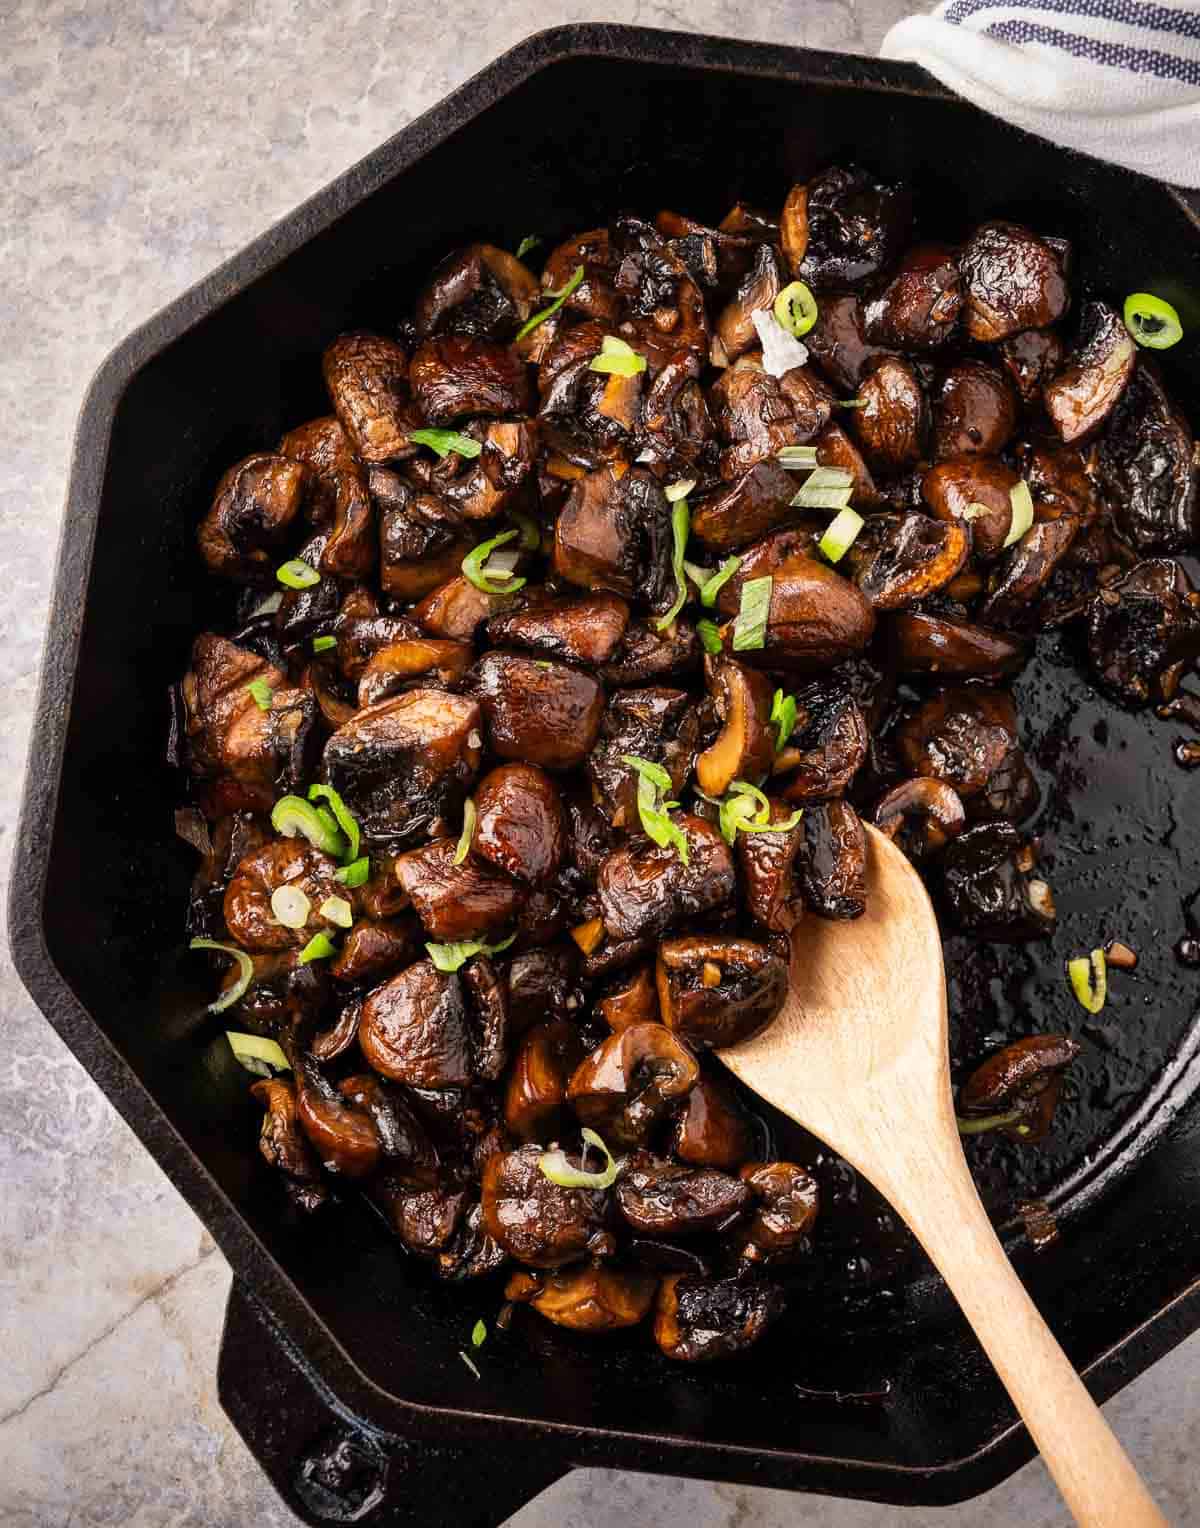 Steakhouse mushrooms in a cast iron pan